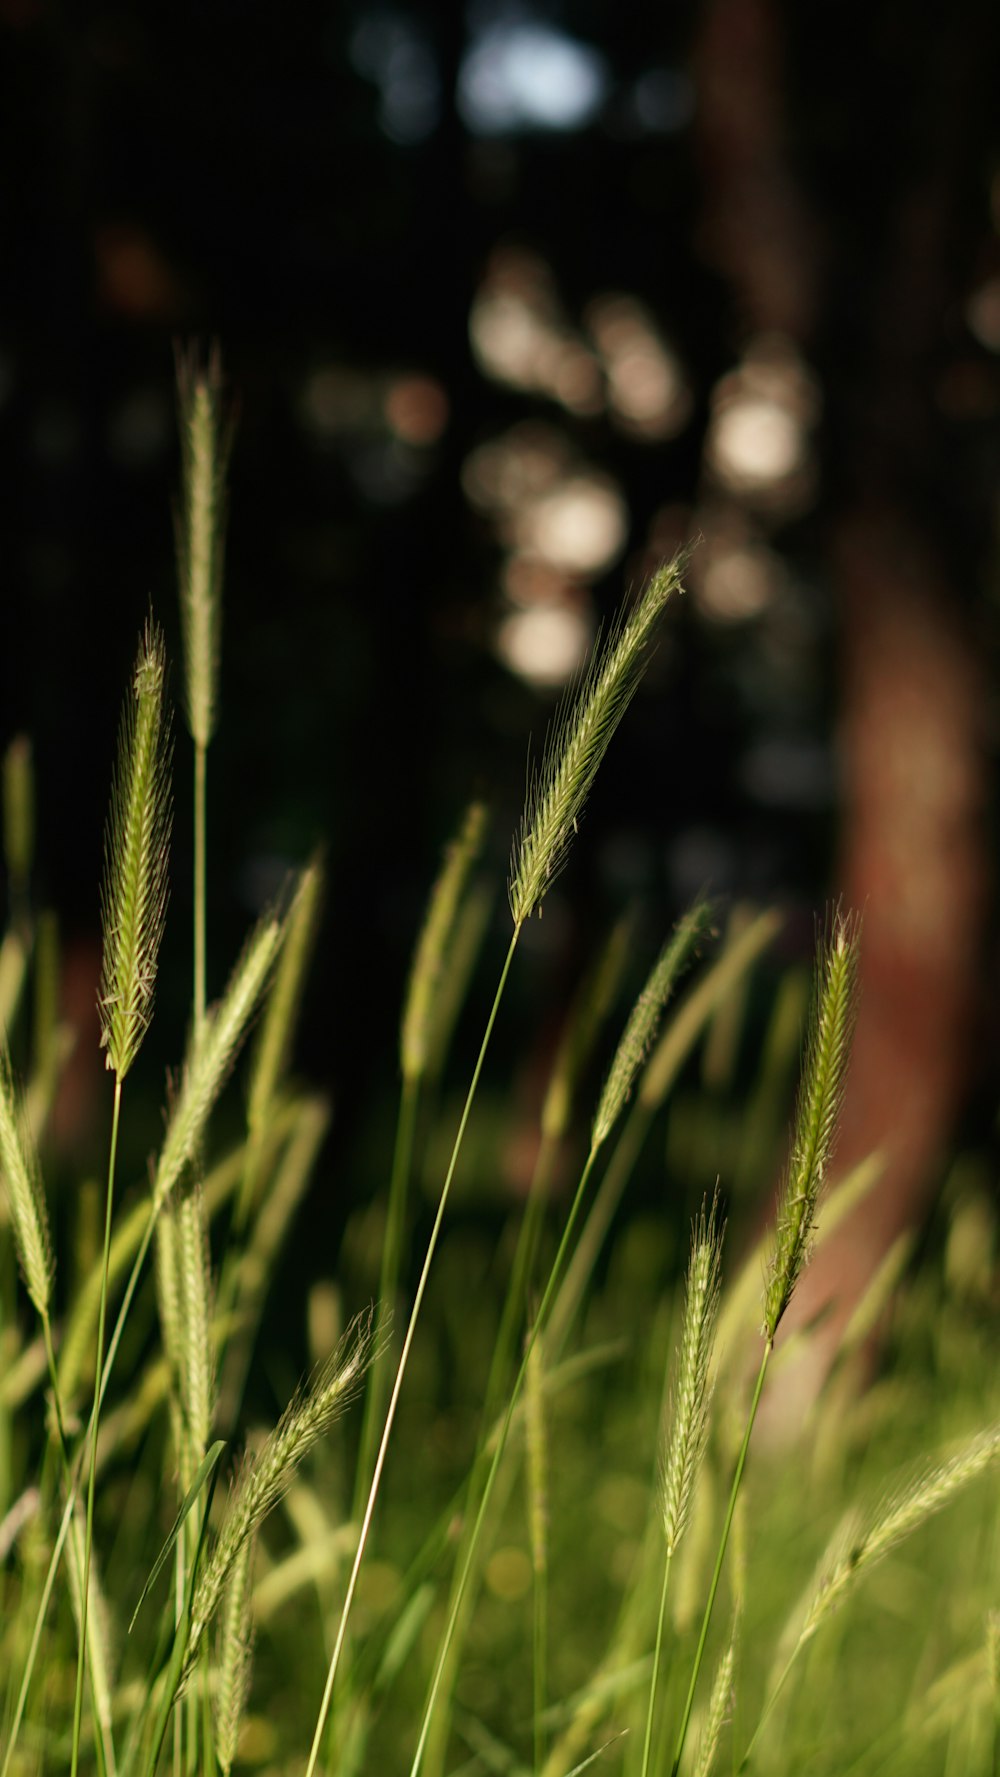 a close up of some grass with trees in the background